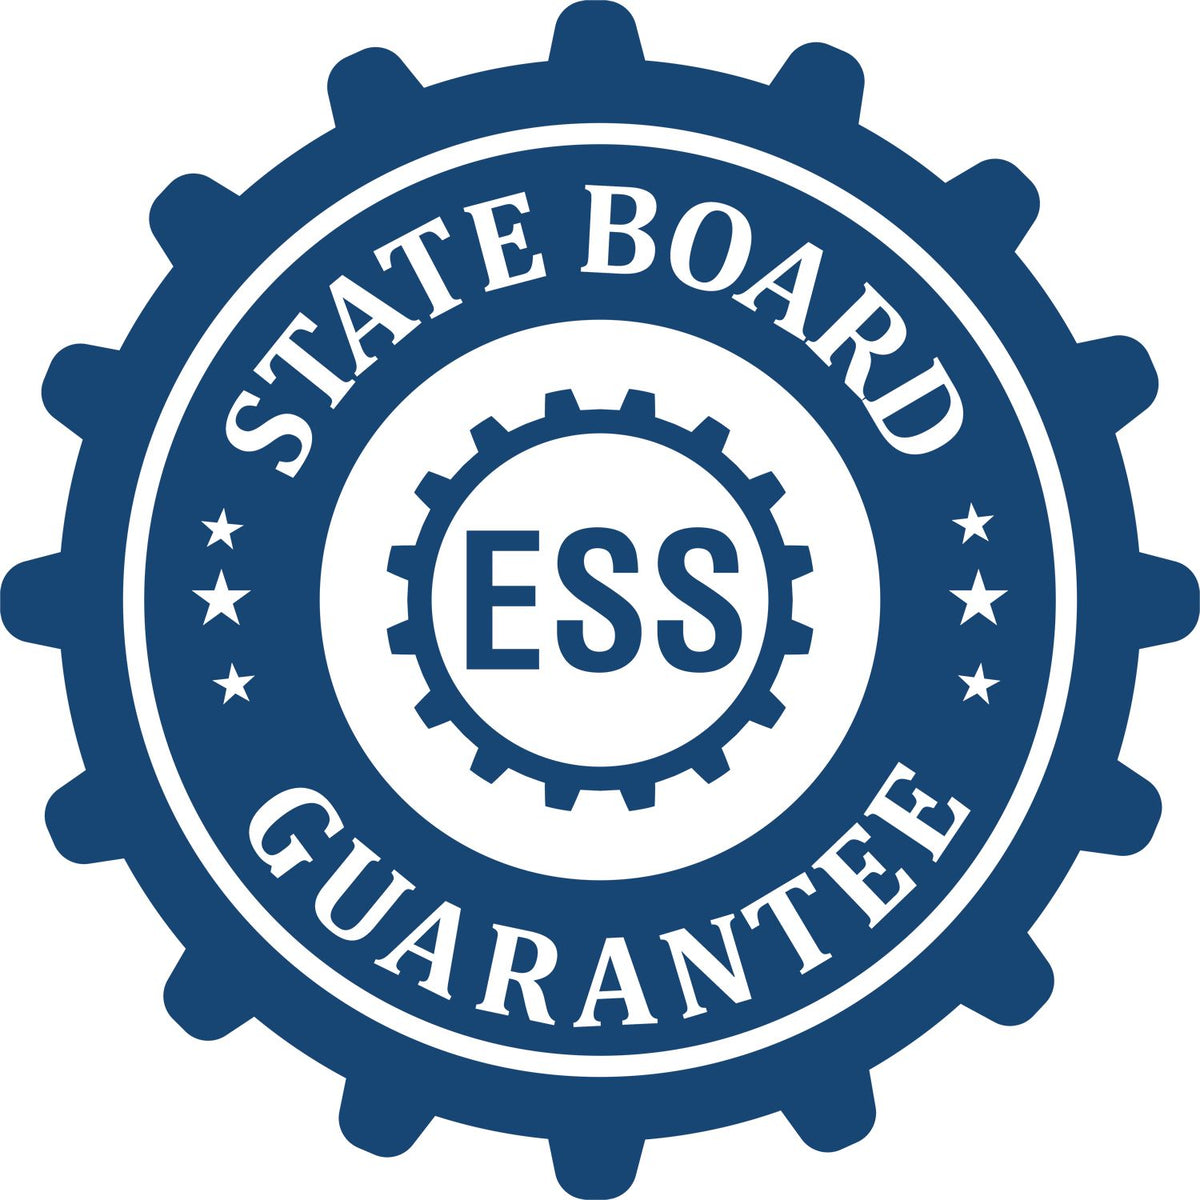 An emblem in a gear shape illustrating a state board guarantee for the Hybrid Florida Architect Seal